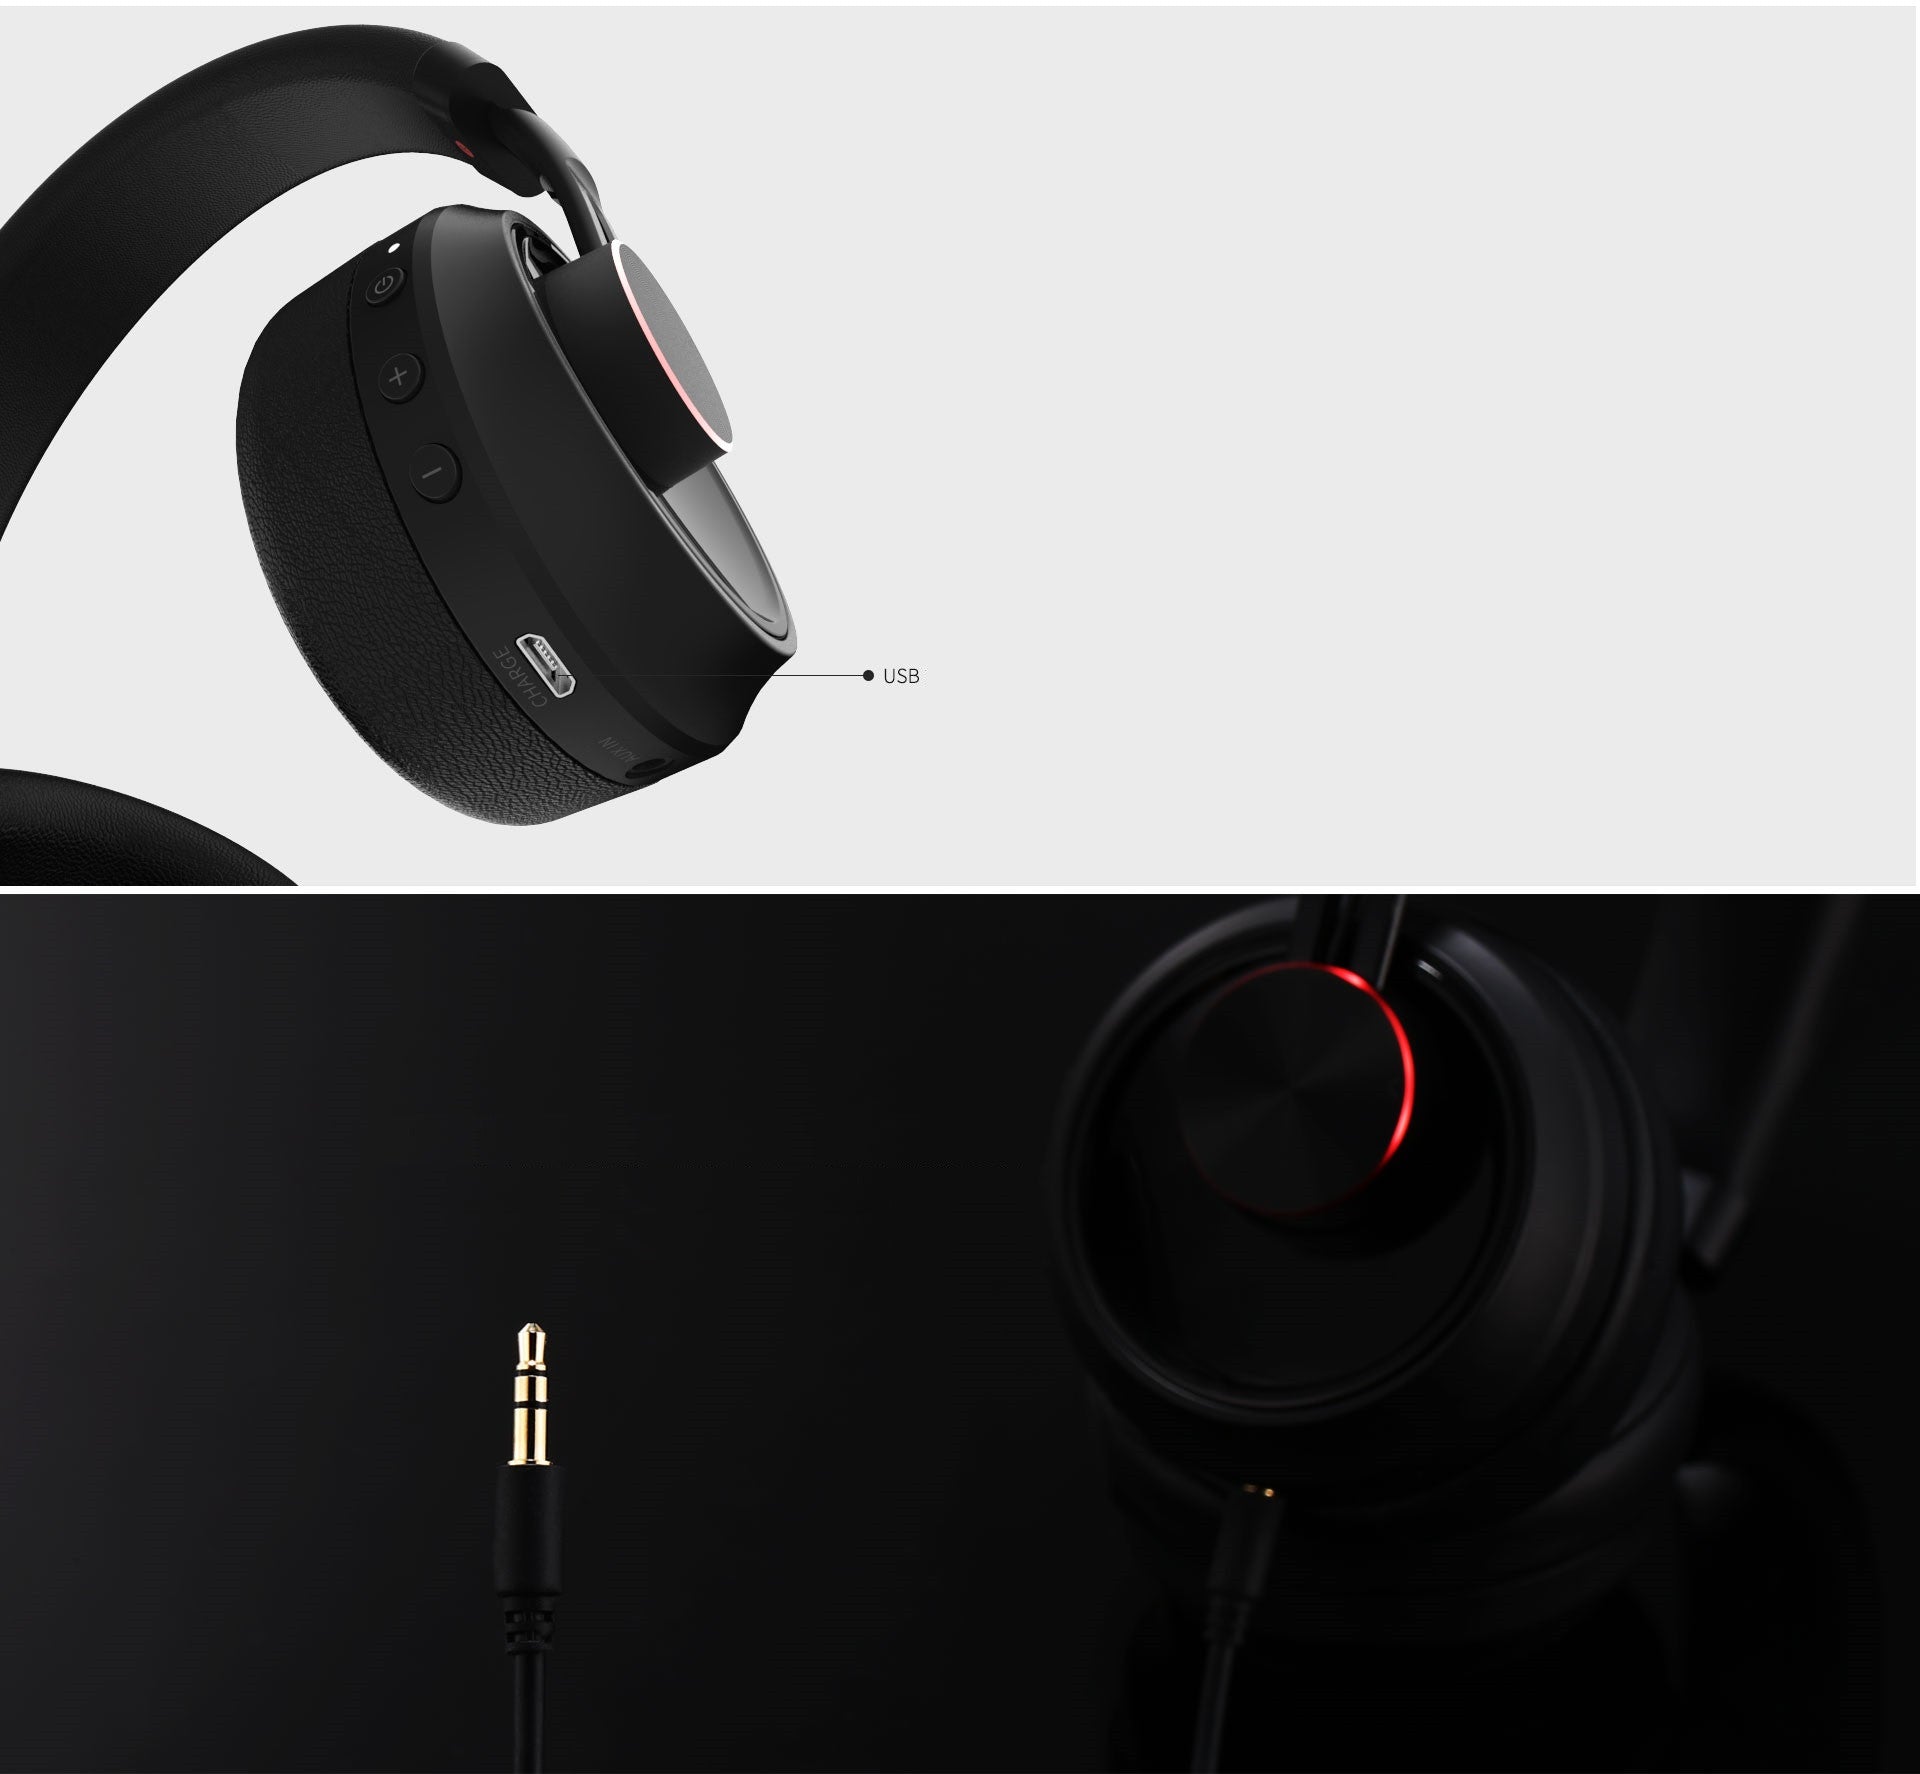 https://www.iremax.com/products/bluetooth-headphone-with-microphone-rb-500hb